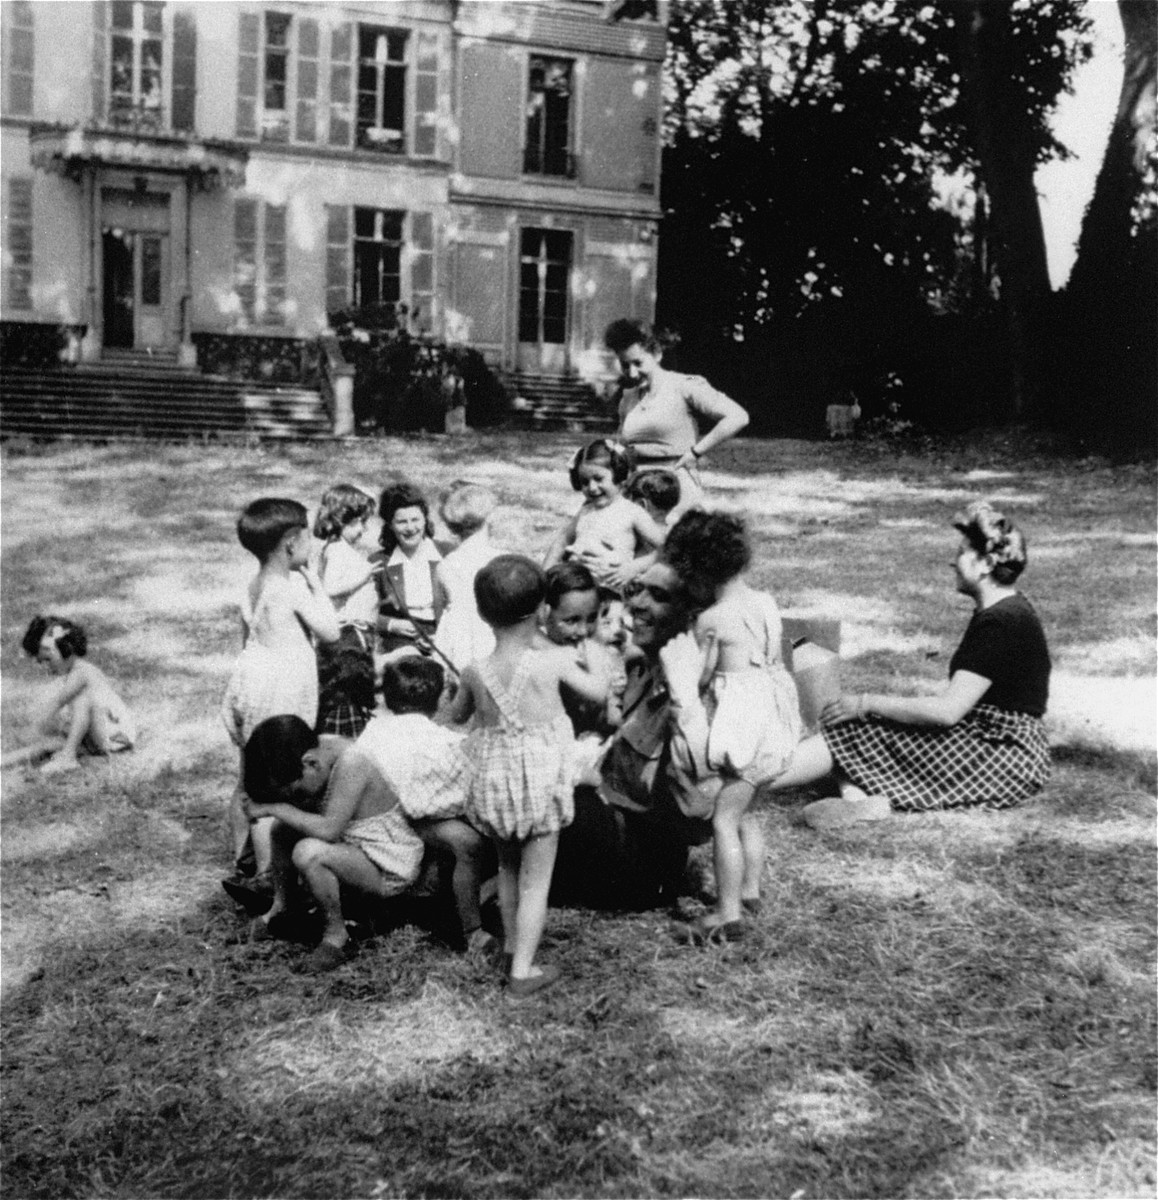 A group of children with whom Hermine Markovitz was working while being trained. She believes it was in Sevres and that Simone Weil may possibly be in this photograph.